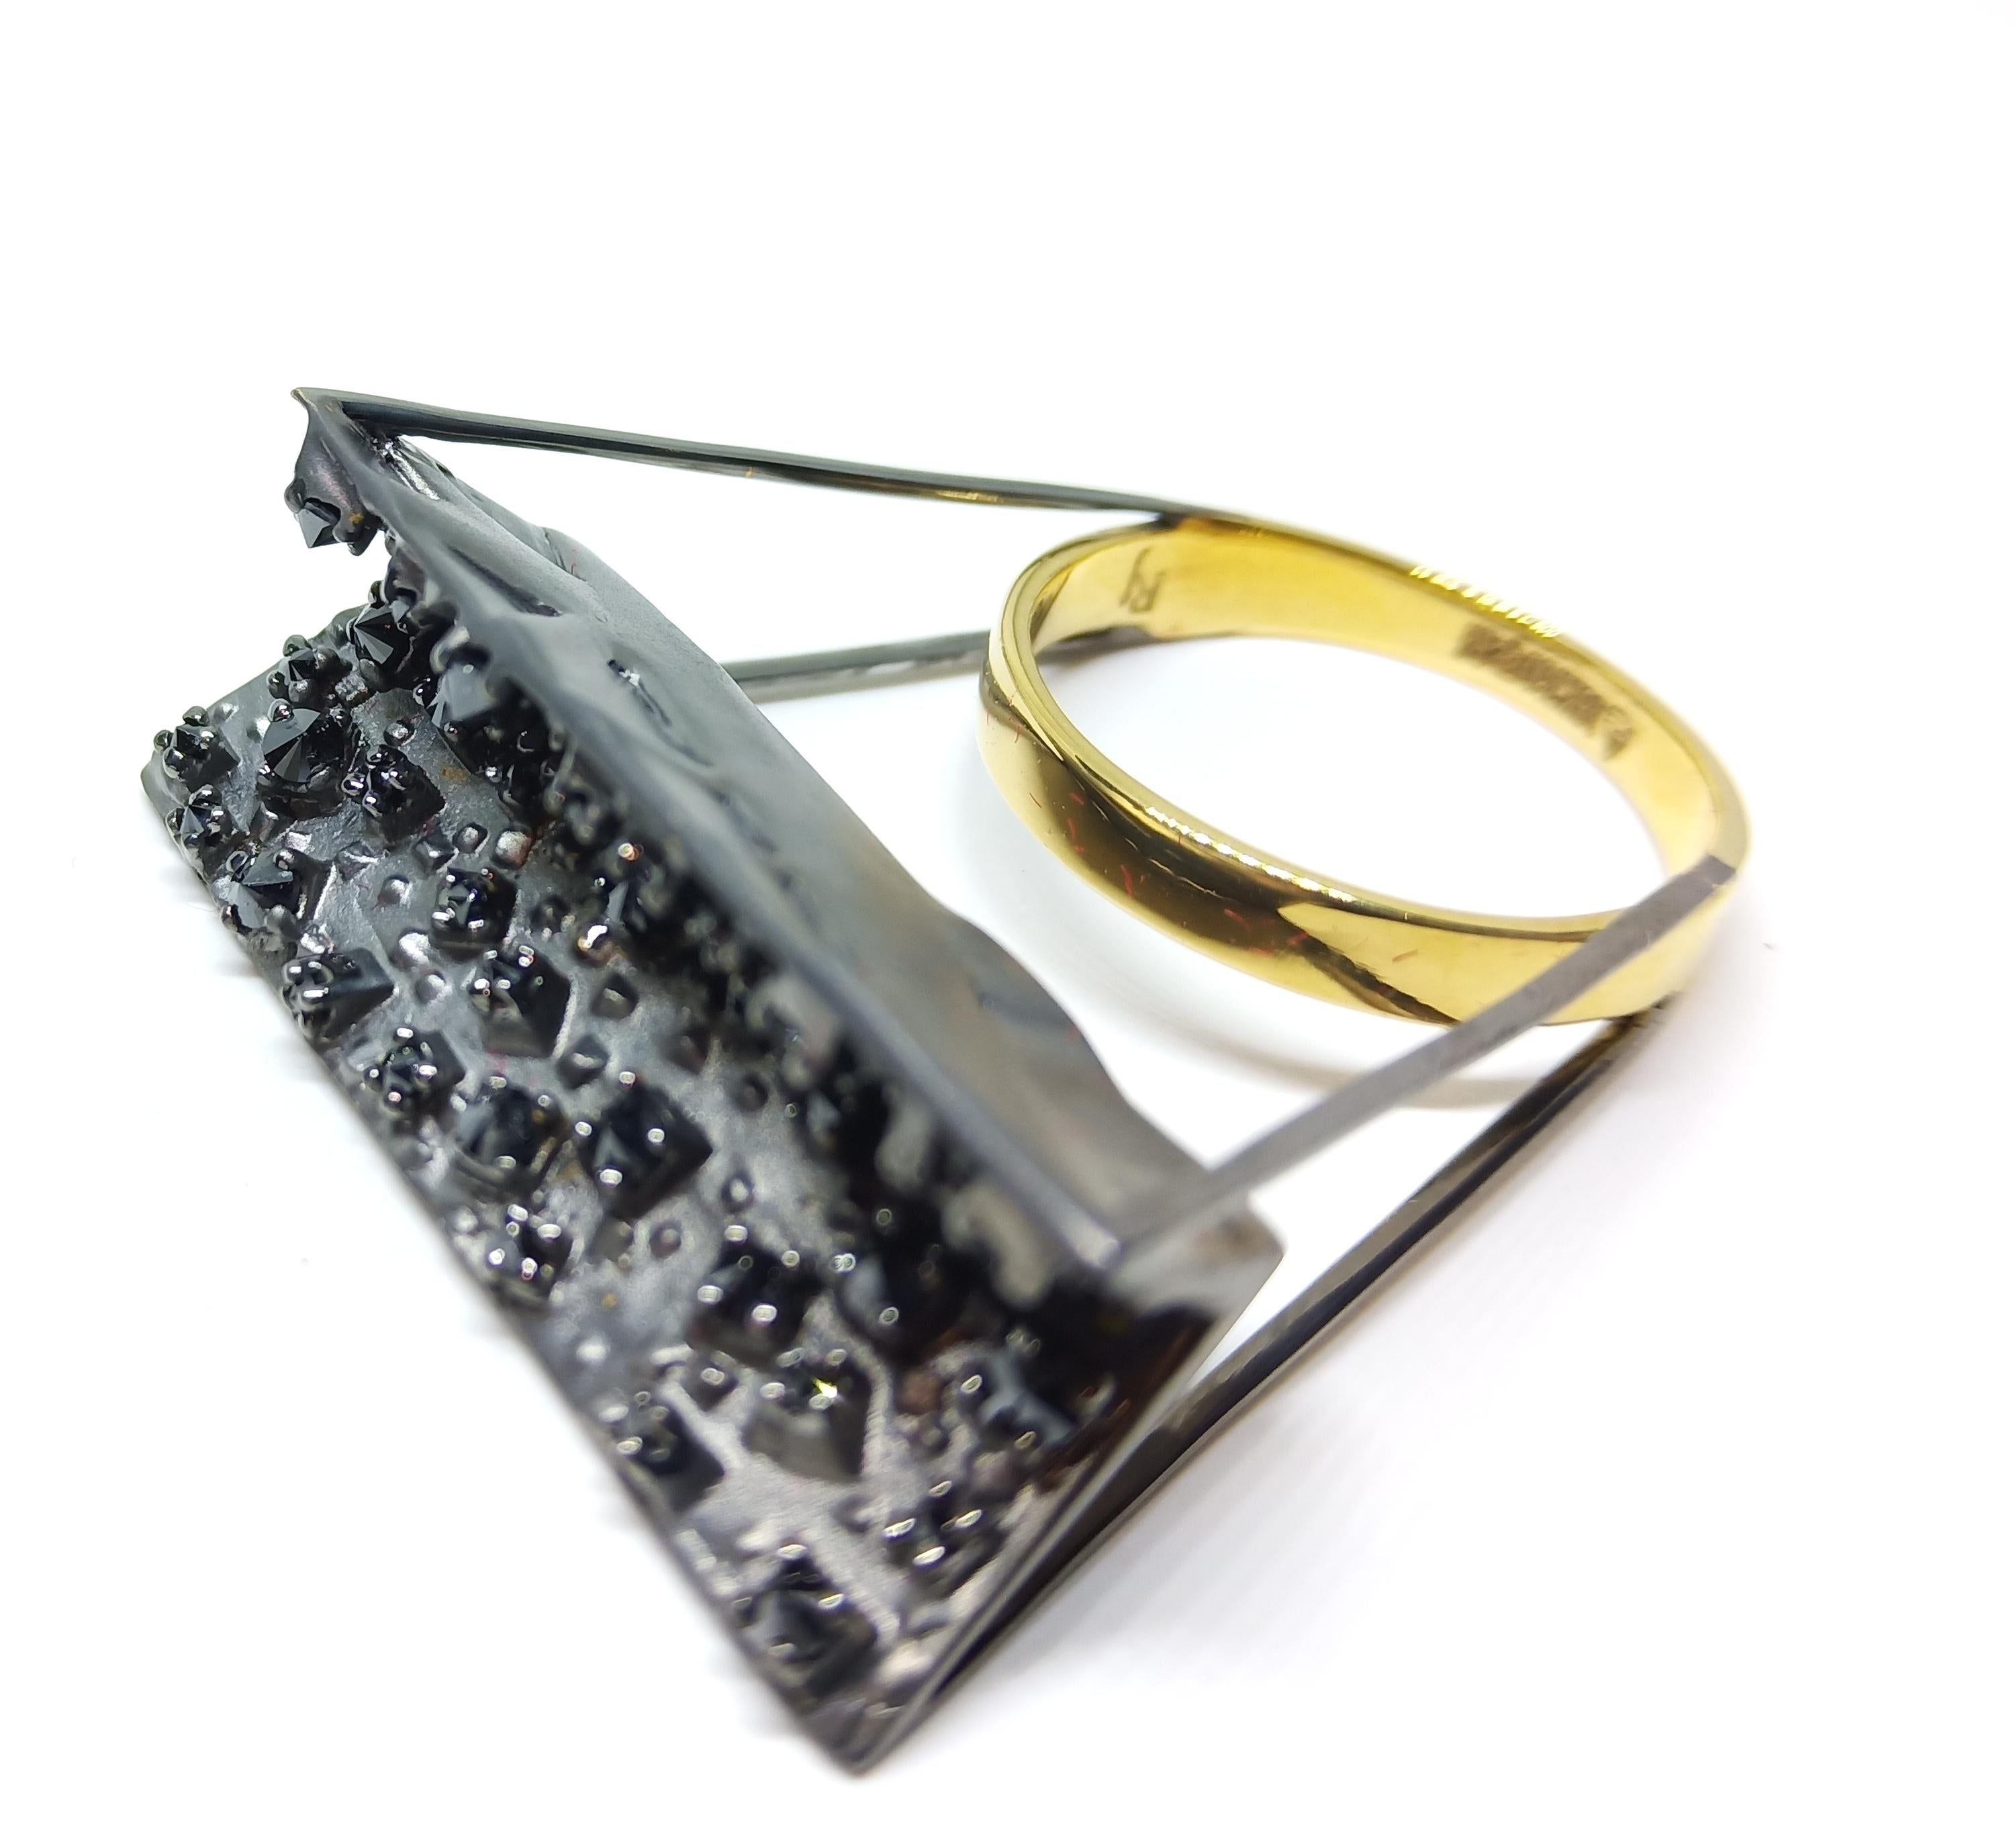 A Out of the Box designed, One Of A Kind Cocktail Ring featuring Yellow and Raw Dull Black Gold finish, predominantly. Inverted Round Black Diamonds are set on top of cubicles of varying shapes and placed at different angles on top of Ring. The top